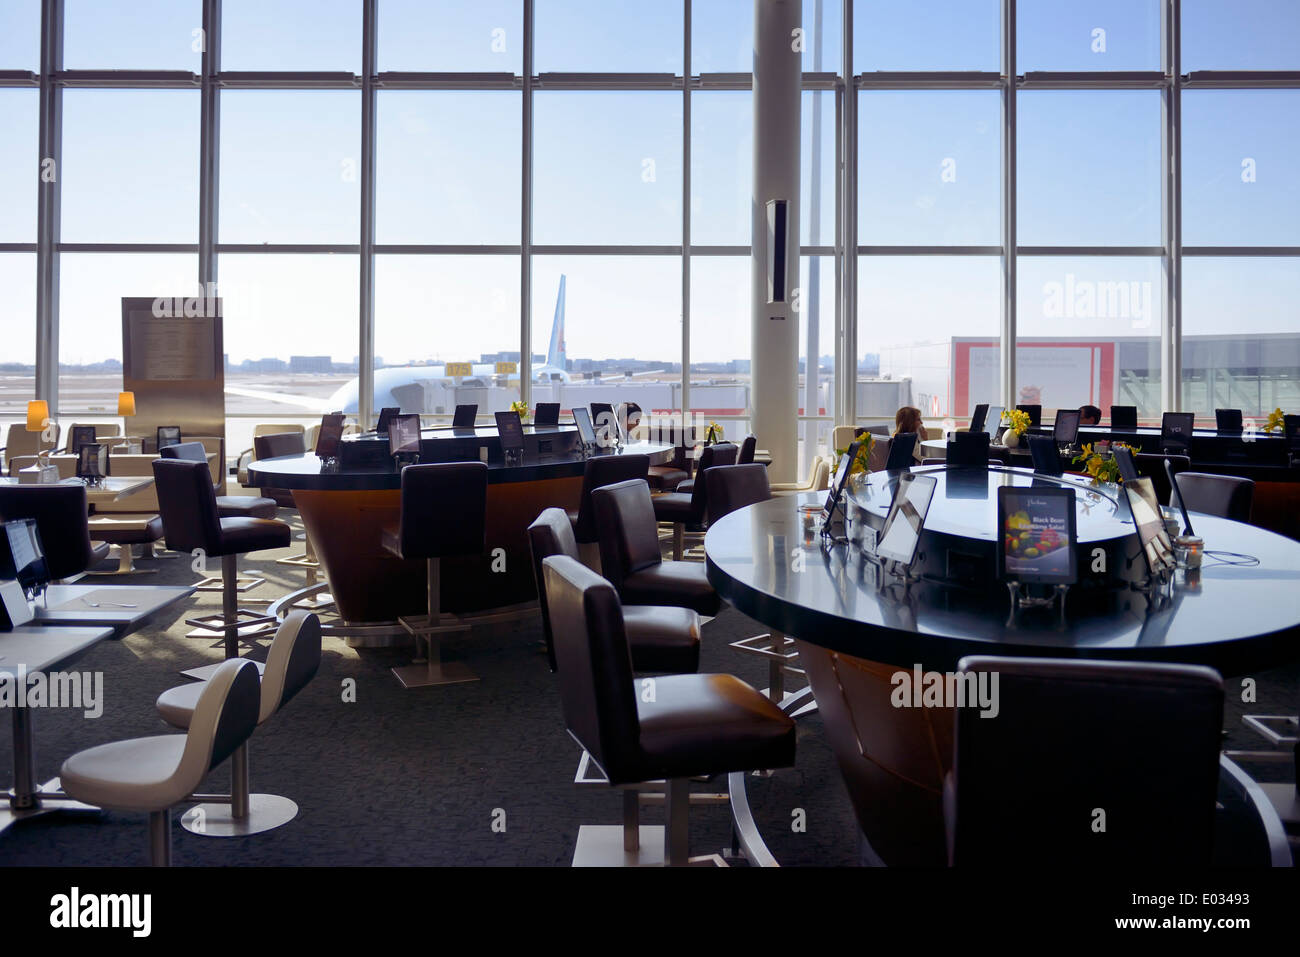 Airport restaurant tables equipped with Apple iPad tablets. Toronto Pearson International Airport. Stock Photo